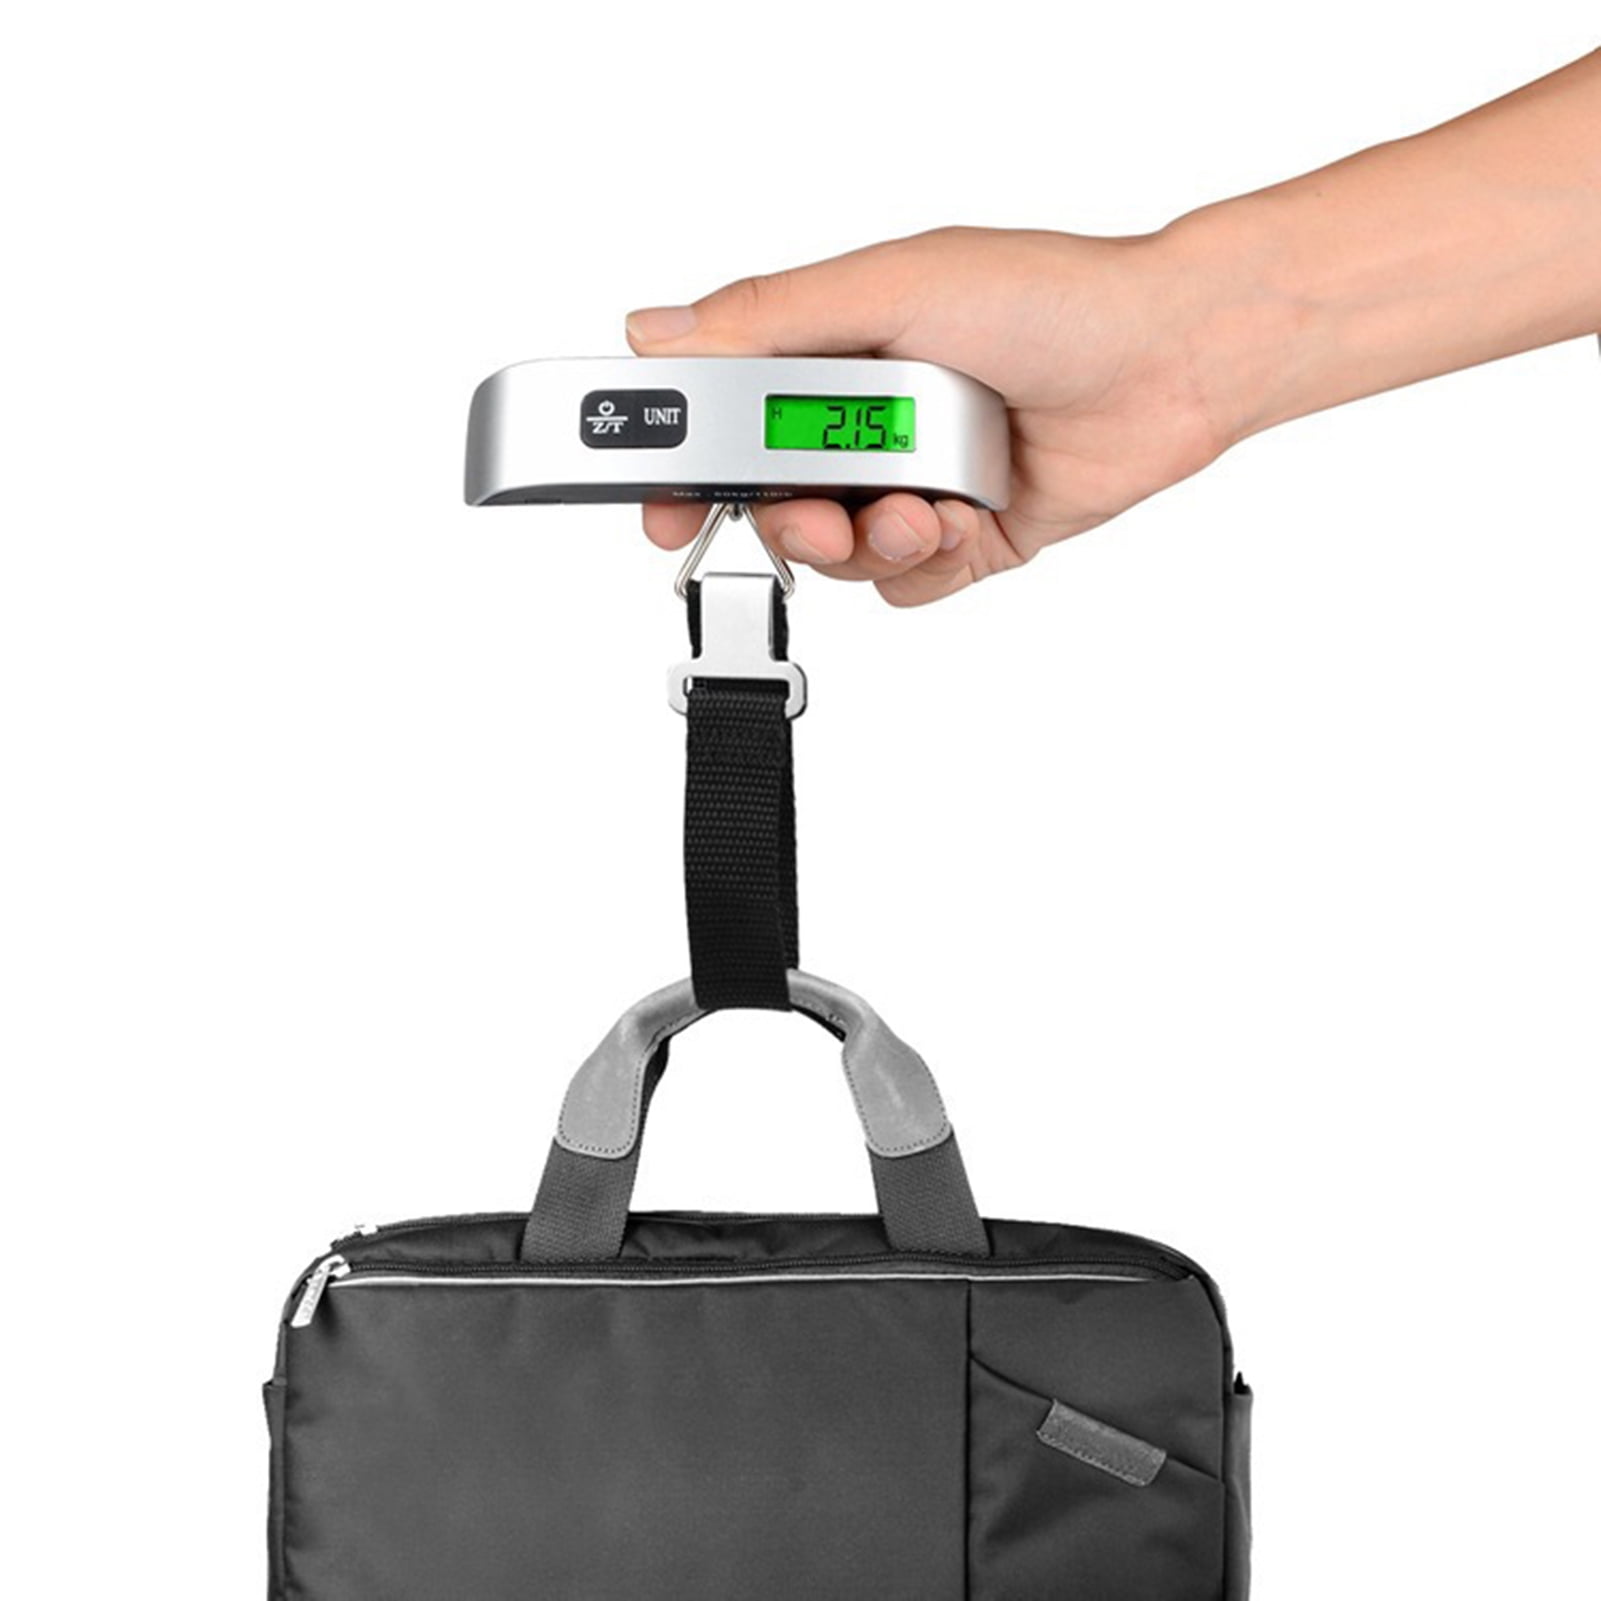 Portable Abs Scale Digital Lcd Display Electronic Luggage Hanging Suitcase  Travel Weighs Baggage Bag Weight Balance Tool - Temu